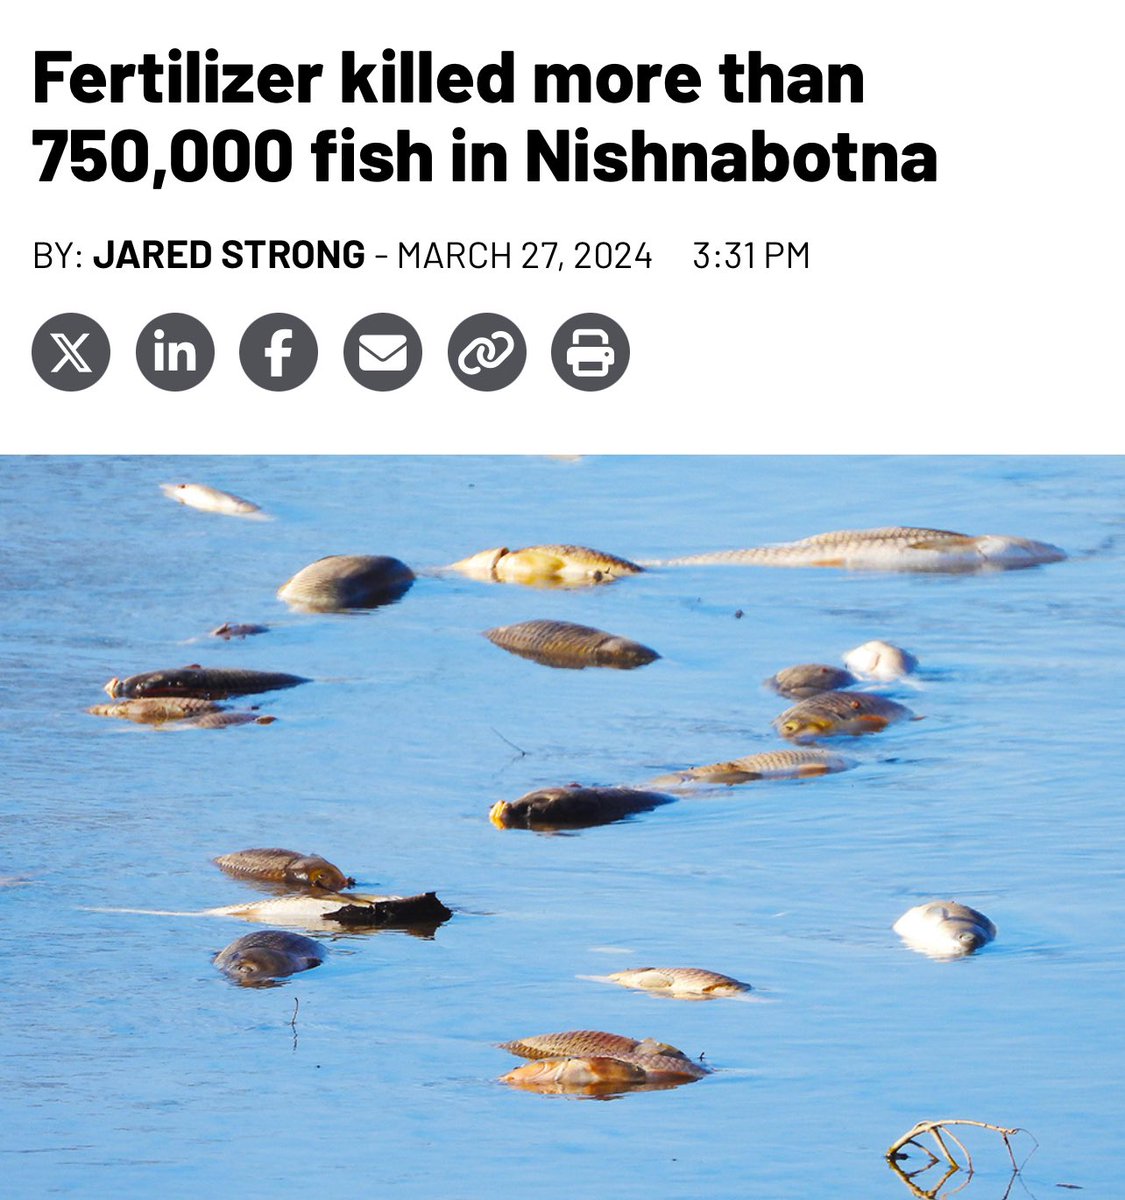 A synthetic nitrogen fertilizer spill just annihilated all aquatic life—fish, frogs, snakes, mussels, earthworms—on a 60-mile(!) stretch of river in Iowa There is no “green” version of this. “Clean” energy doesn’t fix it. Industrial agriculture is incompatible w/ life on Earth